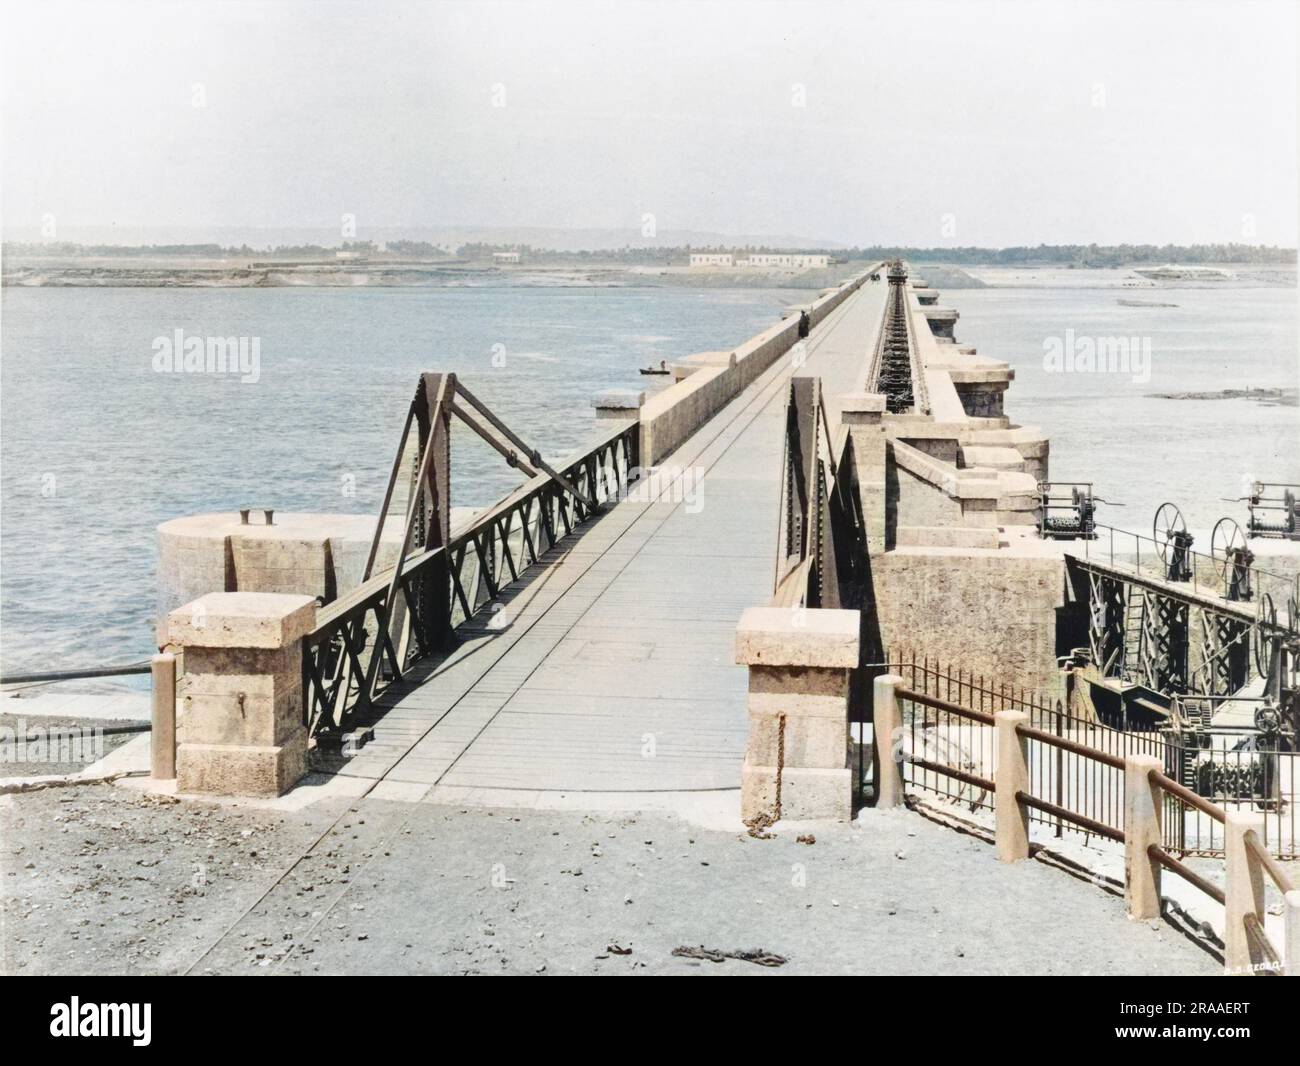 Roadway and swing bridge over lock on the Assiut or Asyut Barrage on the River Nile in Egypt, about 350 miles downstream from the Aswan Dam.     Date: 1902 Stock Photo